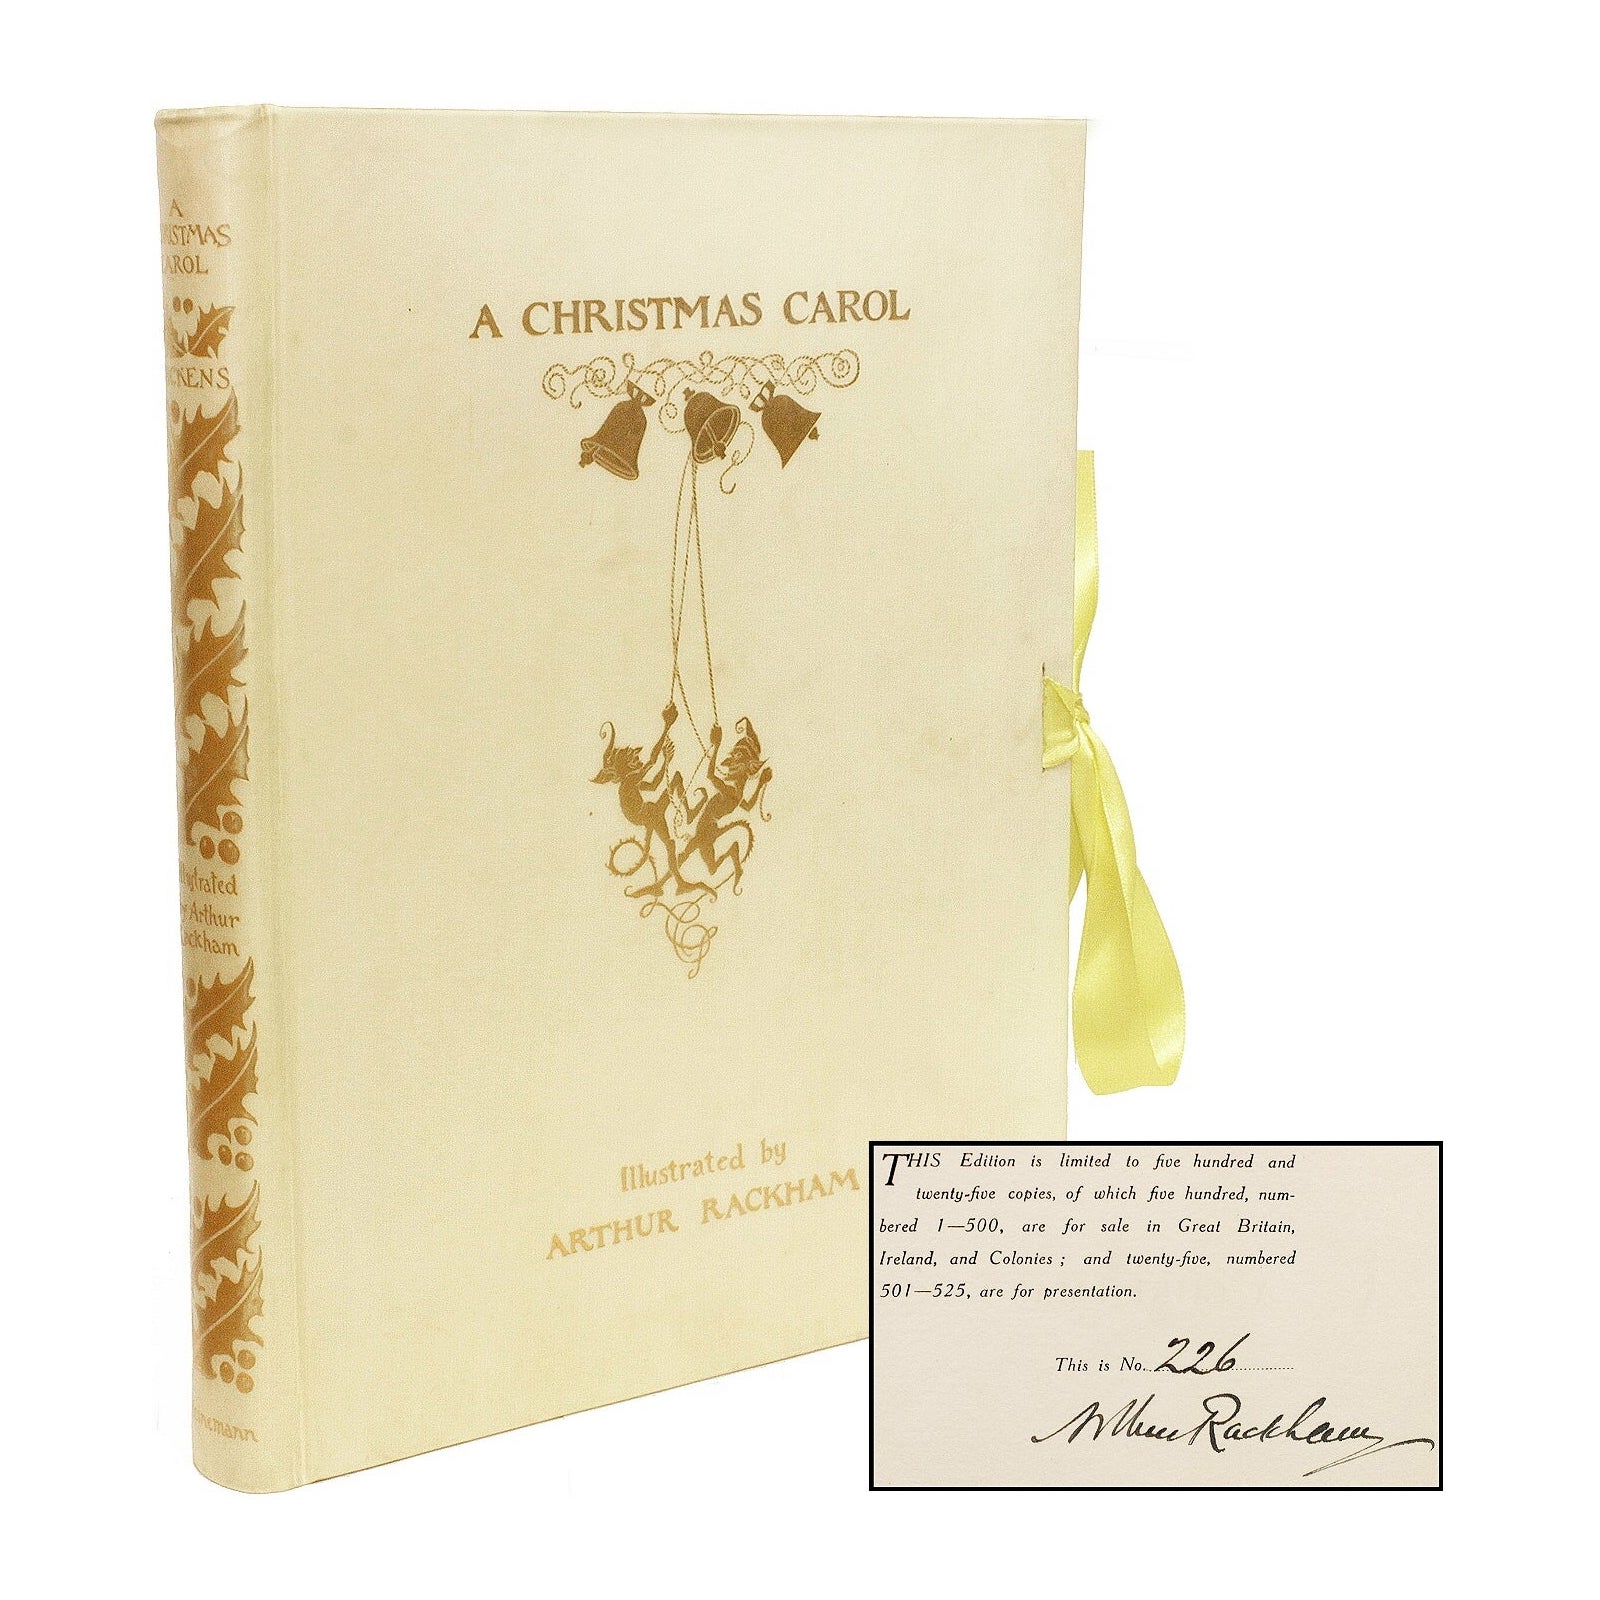 DICKENS, Charles (Arthur Rackham). A Christmas Carol. LIMITED SIGNED EDITION For Sale